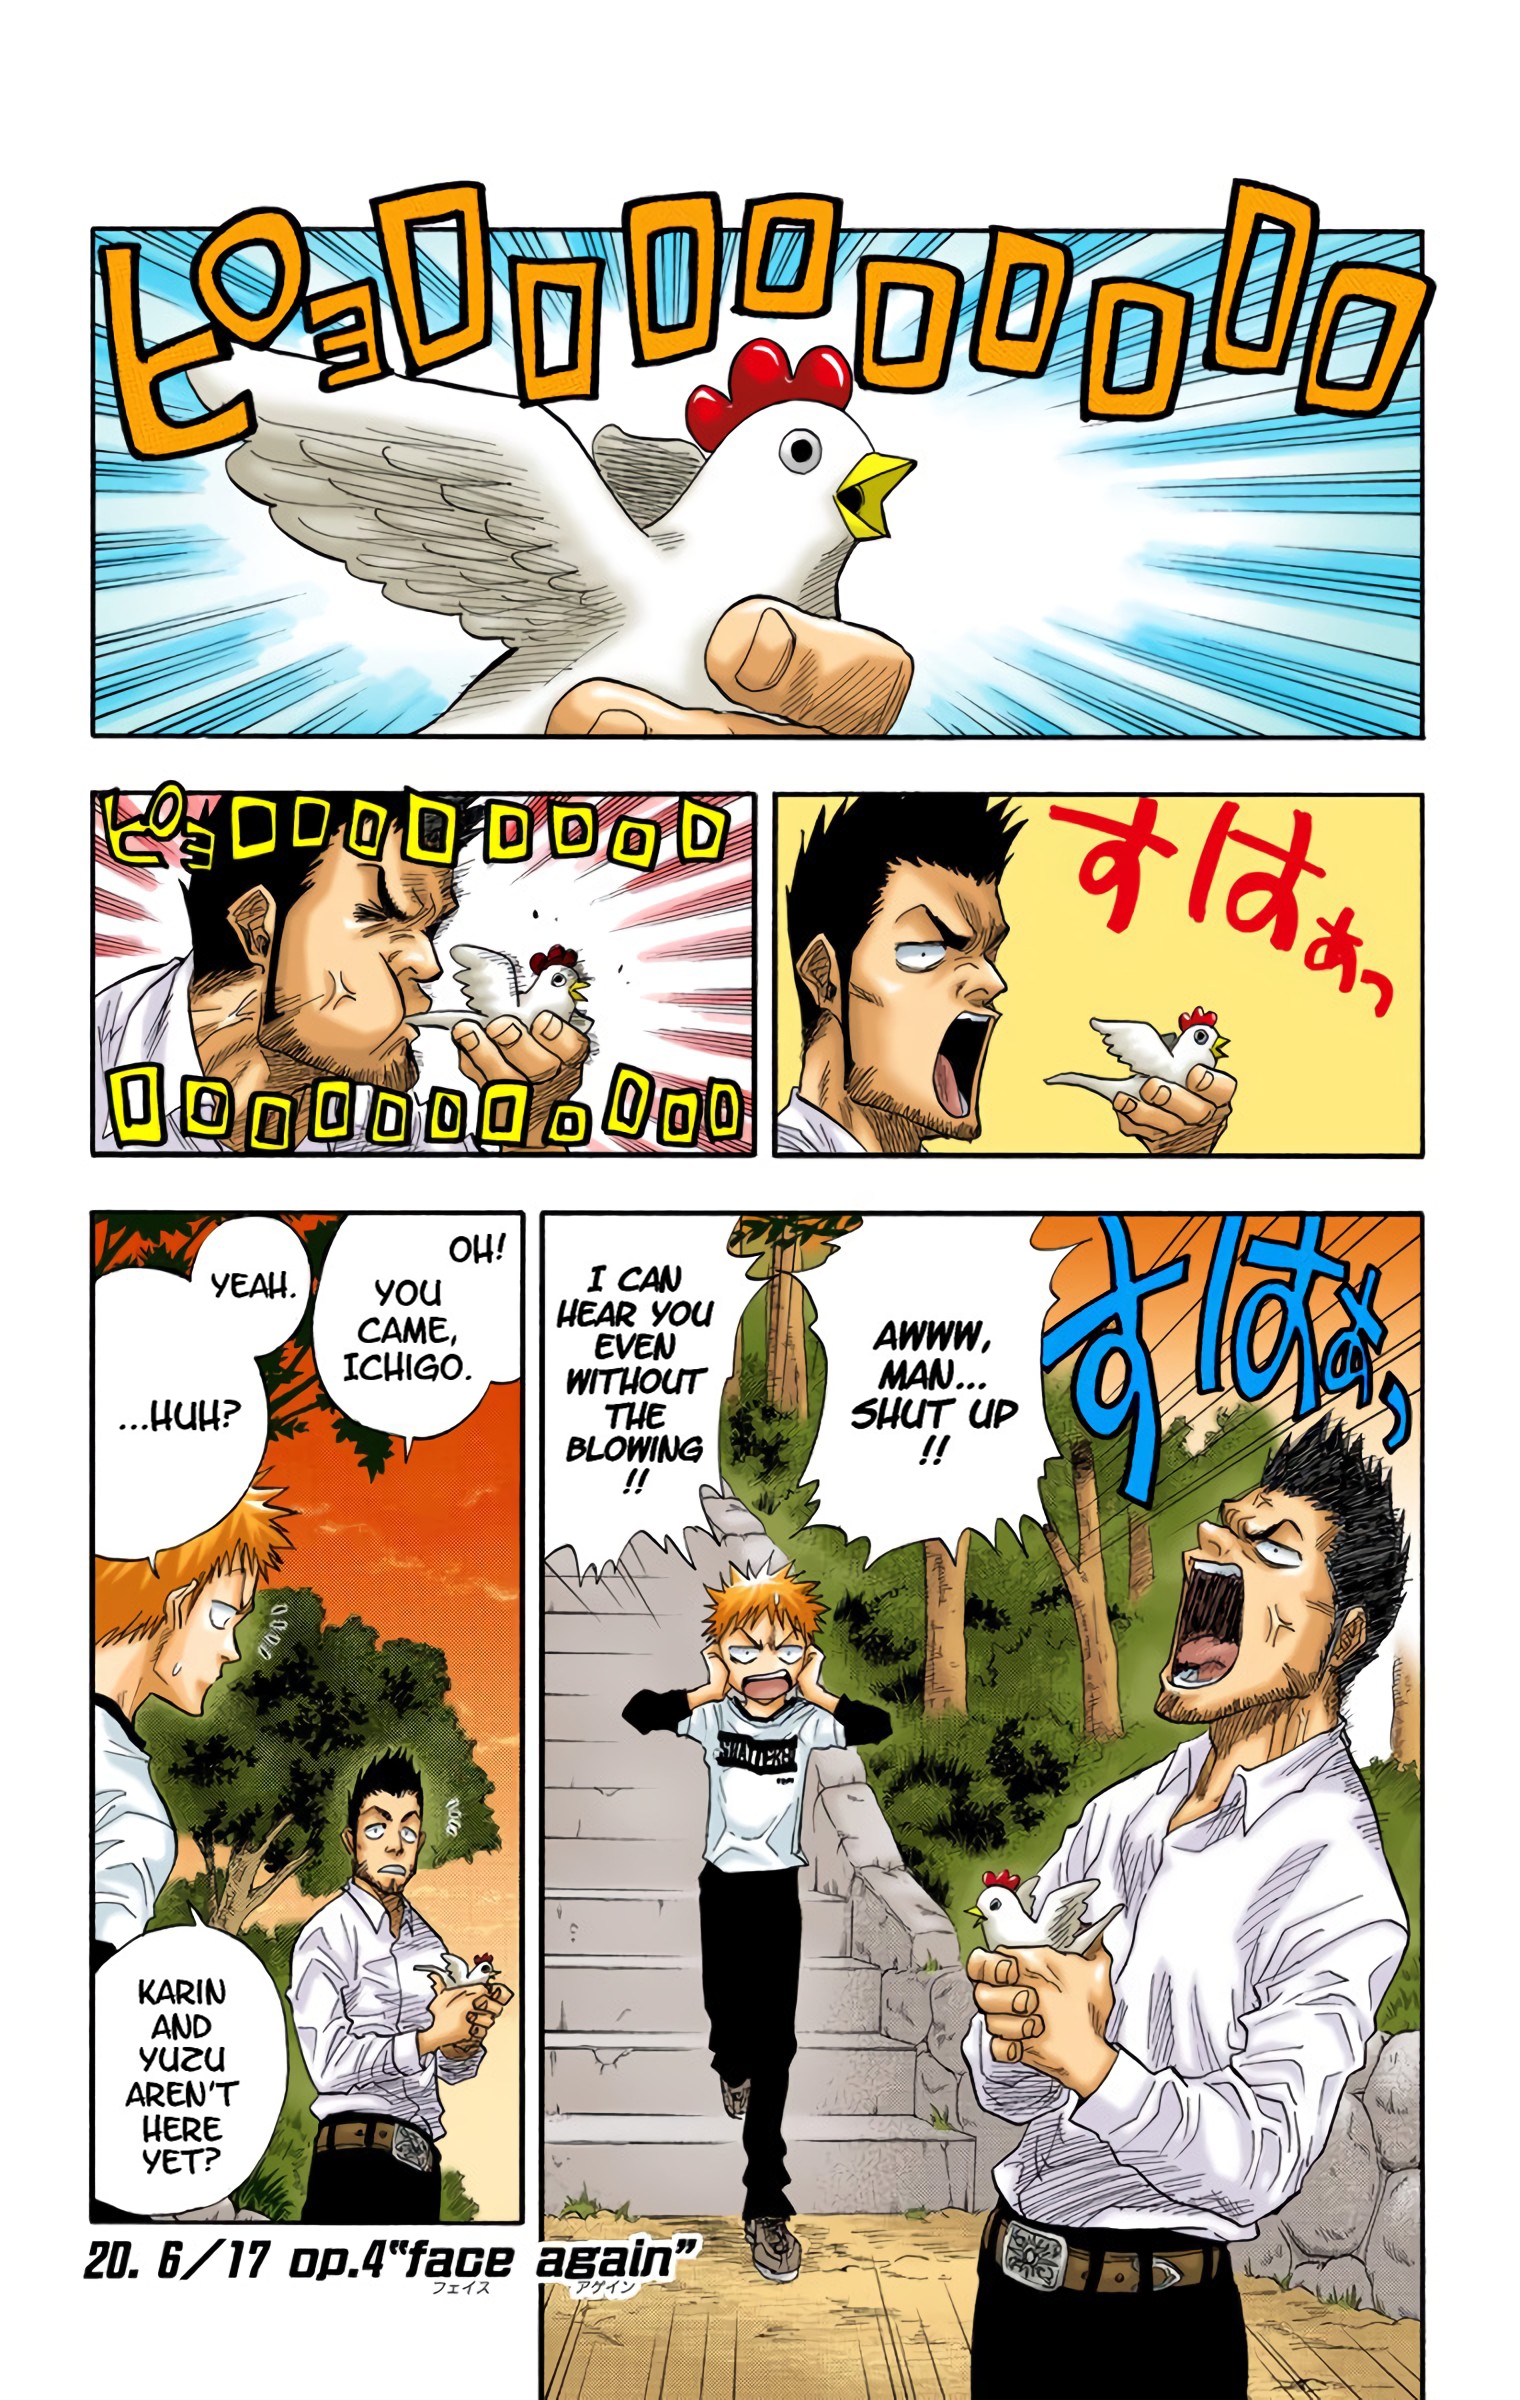 Bleach - Digital Colored Comics Vol.3 Chapter 20: 6/17 Op. 4 A Face From The Past - Picture 1